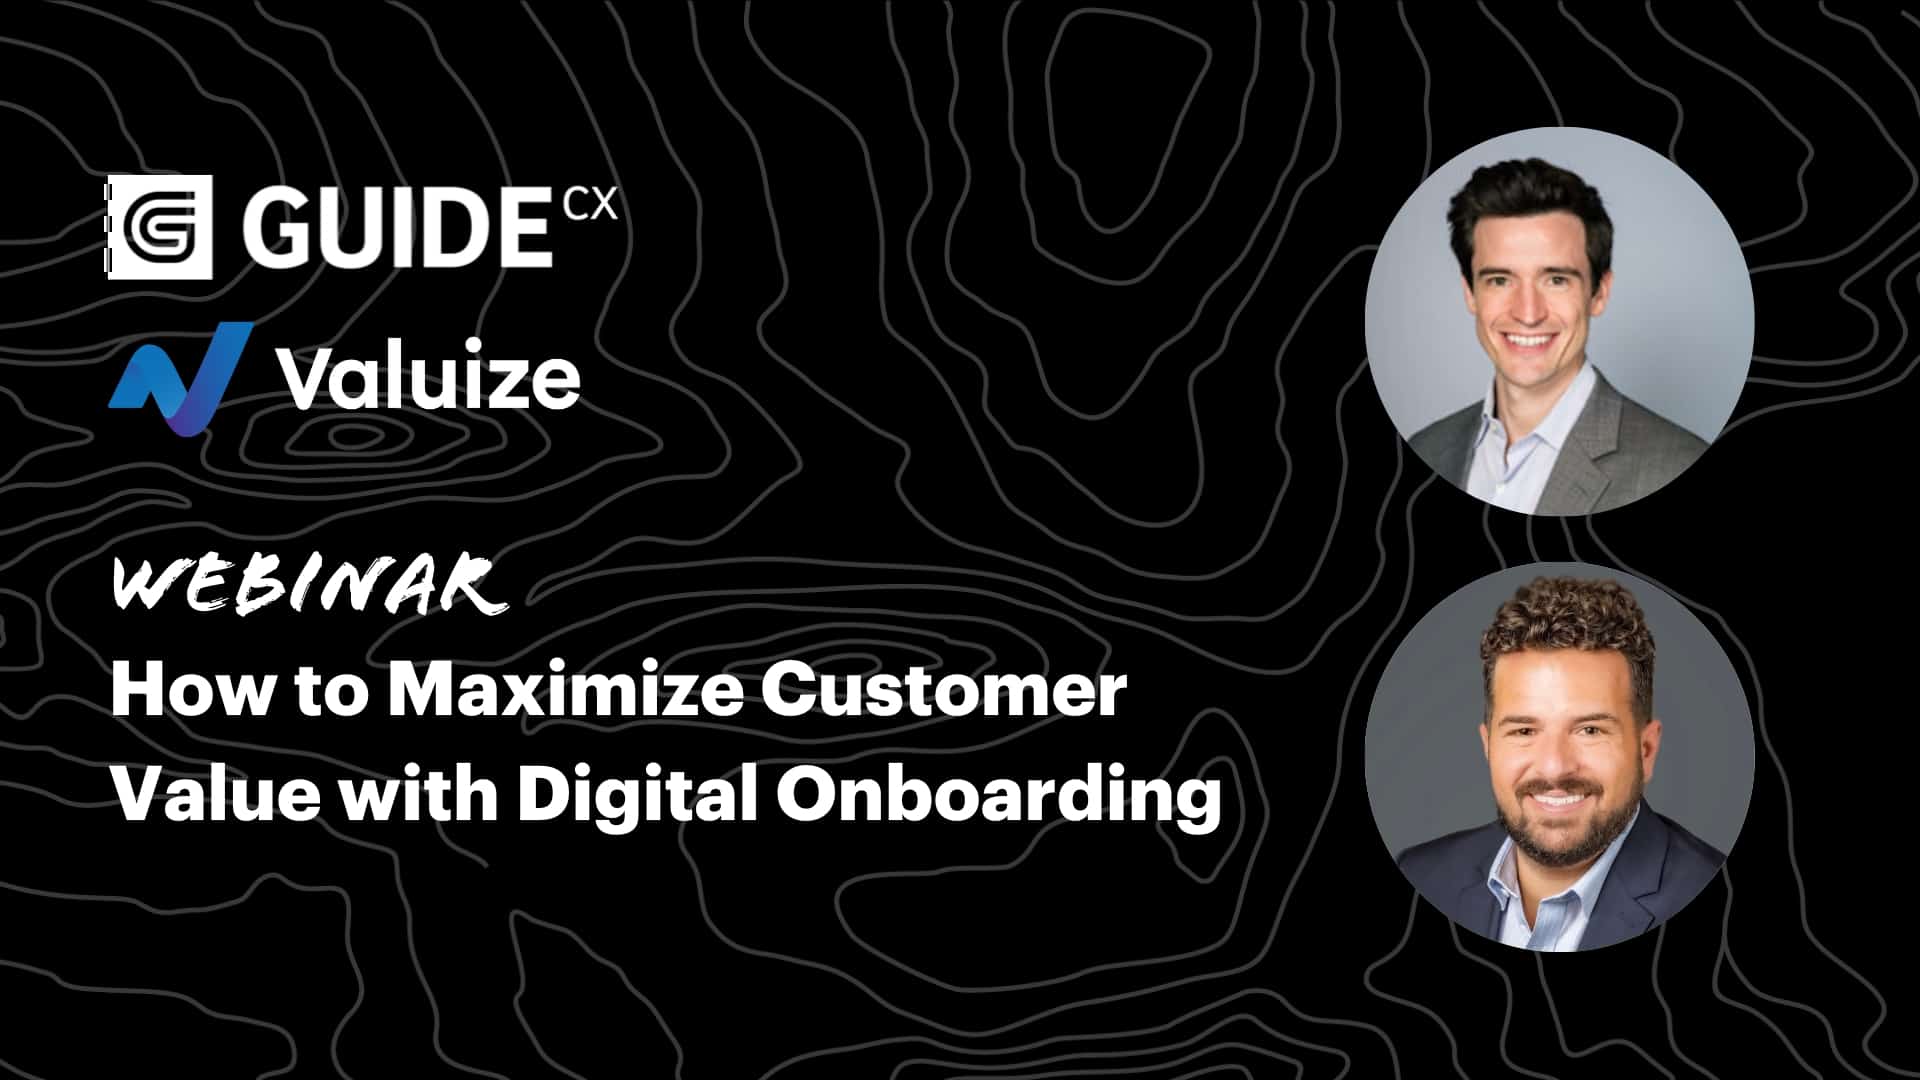 GUIDEcx and Valuize tag team a webinar about maximizing customer value with digital onboarding featuring GUIDEcx COO Harris Clark and Valuize team member Tony D'Auria